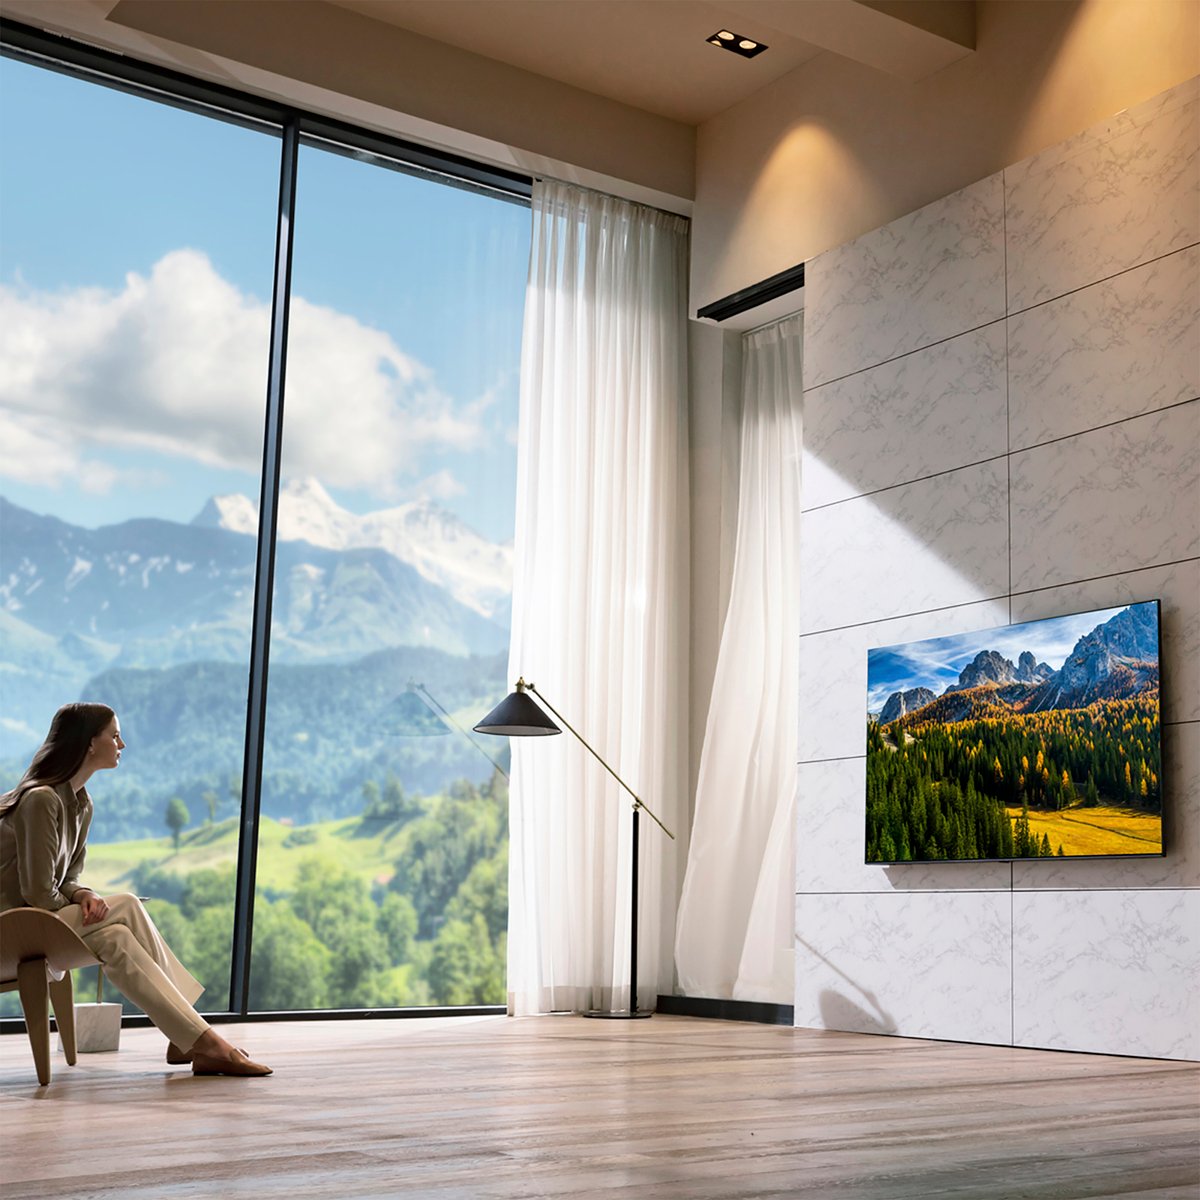 LG NanoCell 4K Smart TV 86 Inch NANO90 Series, ,New 2021 Cinema Screen Design 4K Cinema HDR webOS Smart with ThinQ AI Full Array Dimming Pro